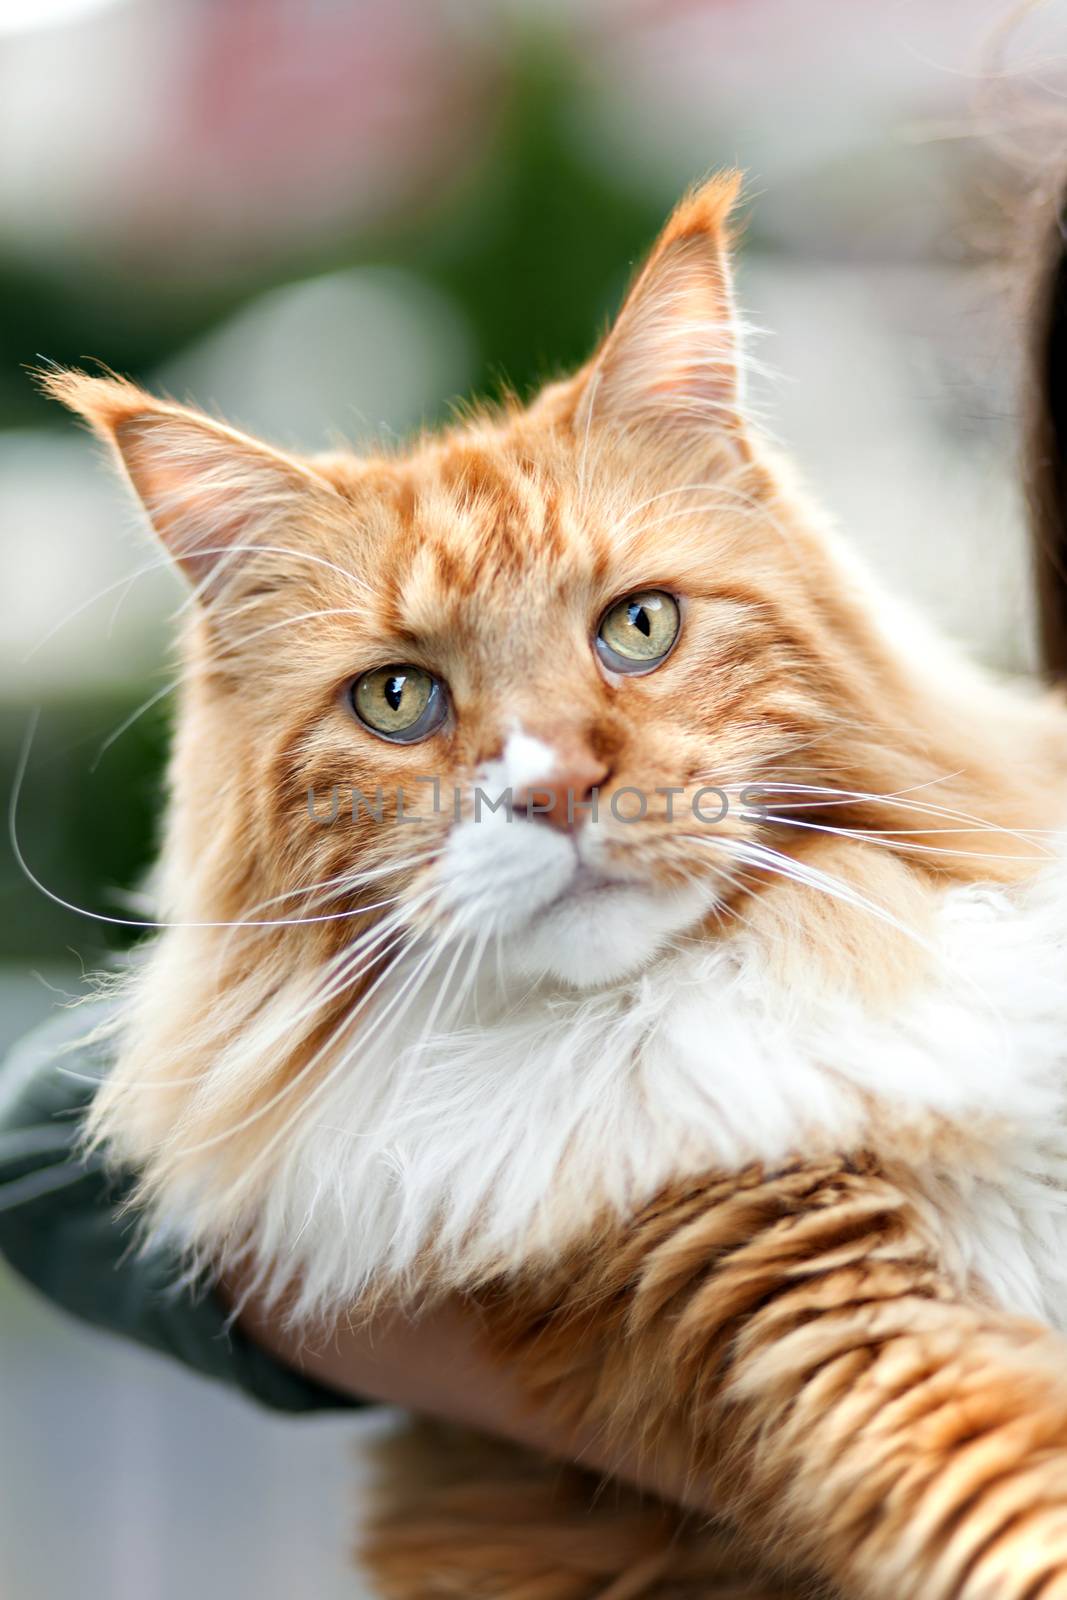 Rare purebred Maine Coon cat close up.  Shallow depth of field.